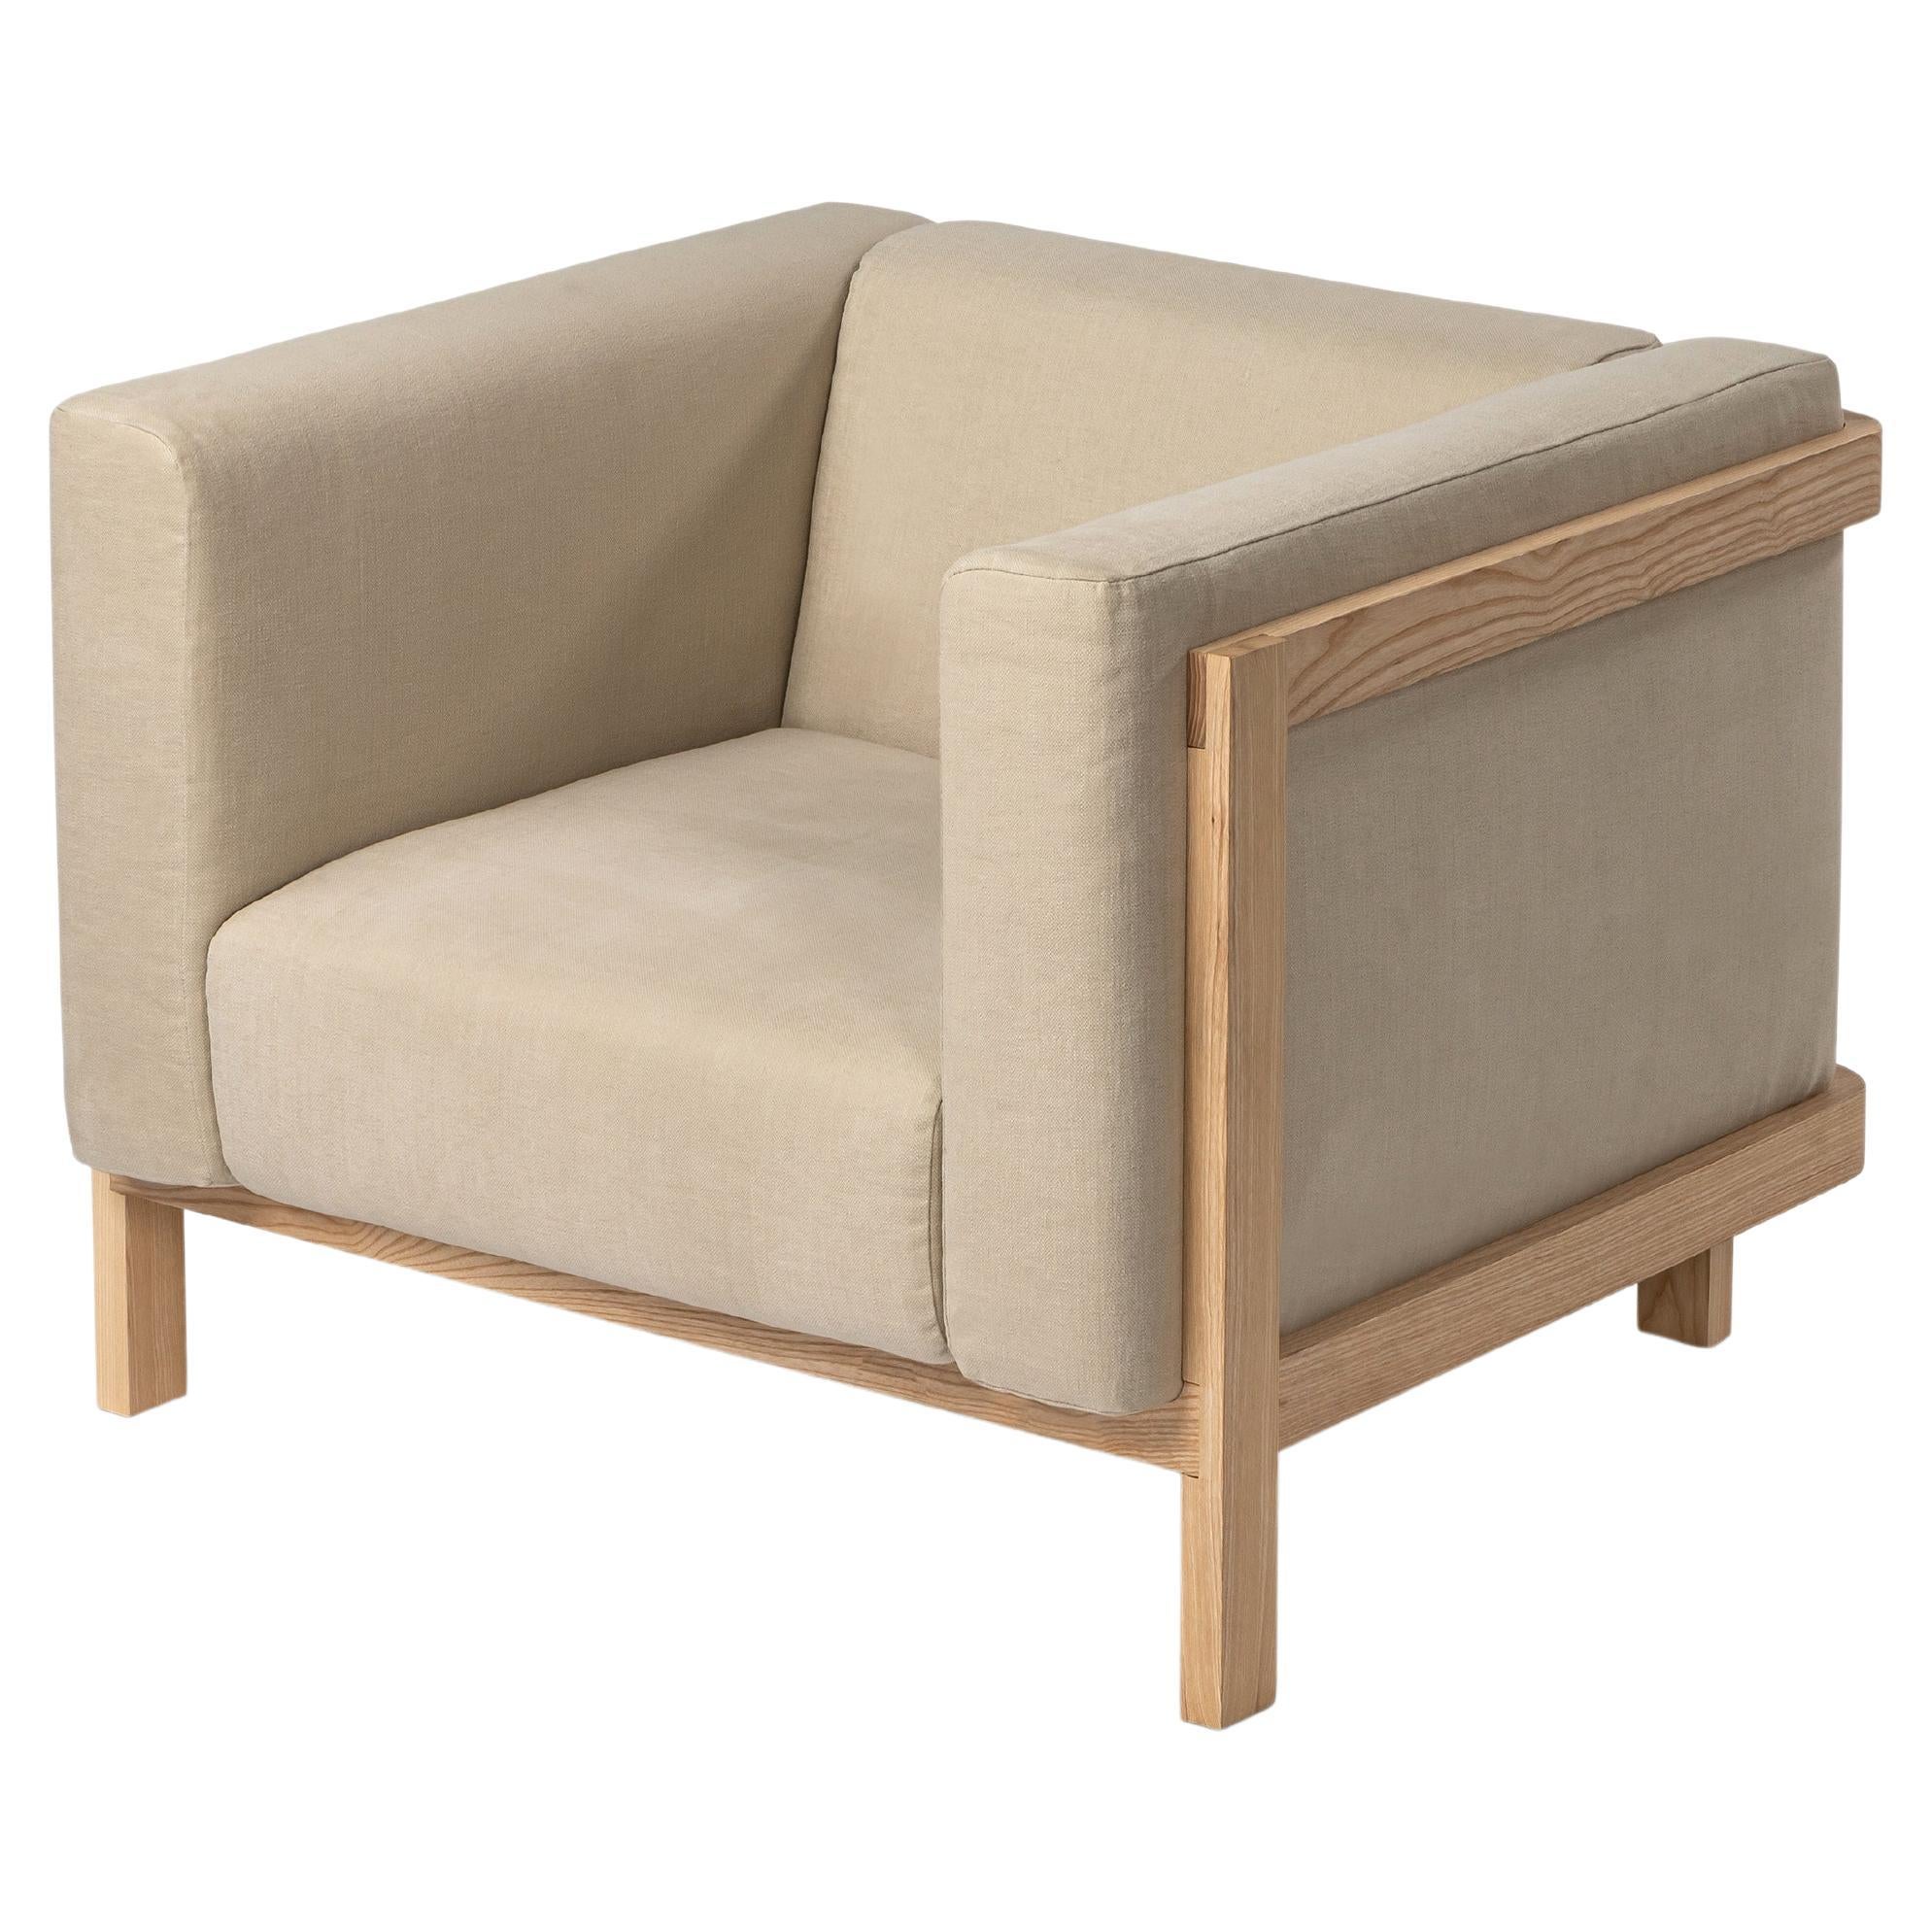 Minimalist one seater sofa oak - fabric upholstered For Sale